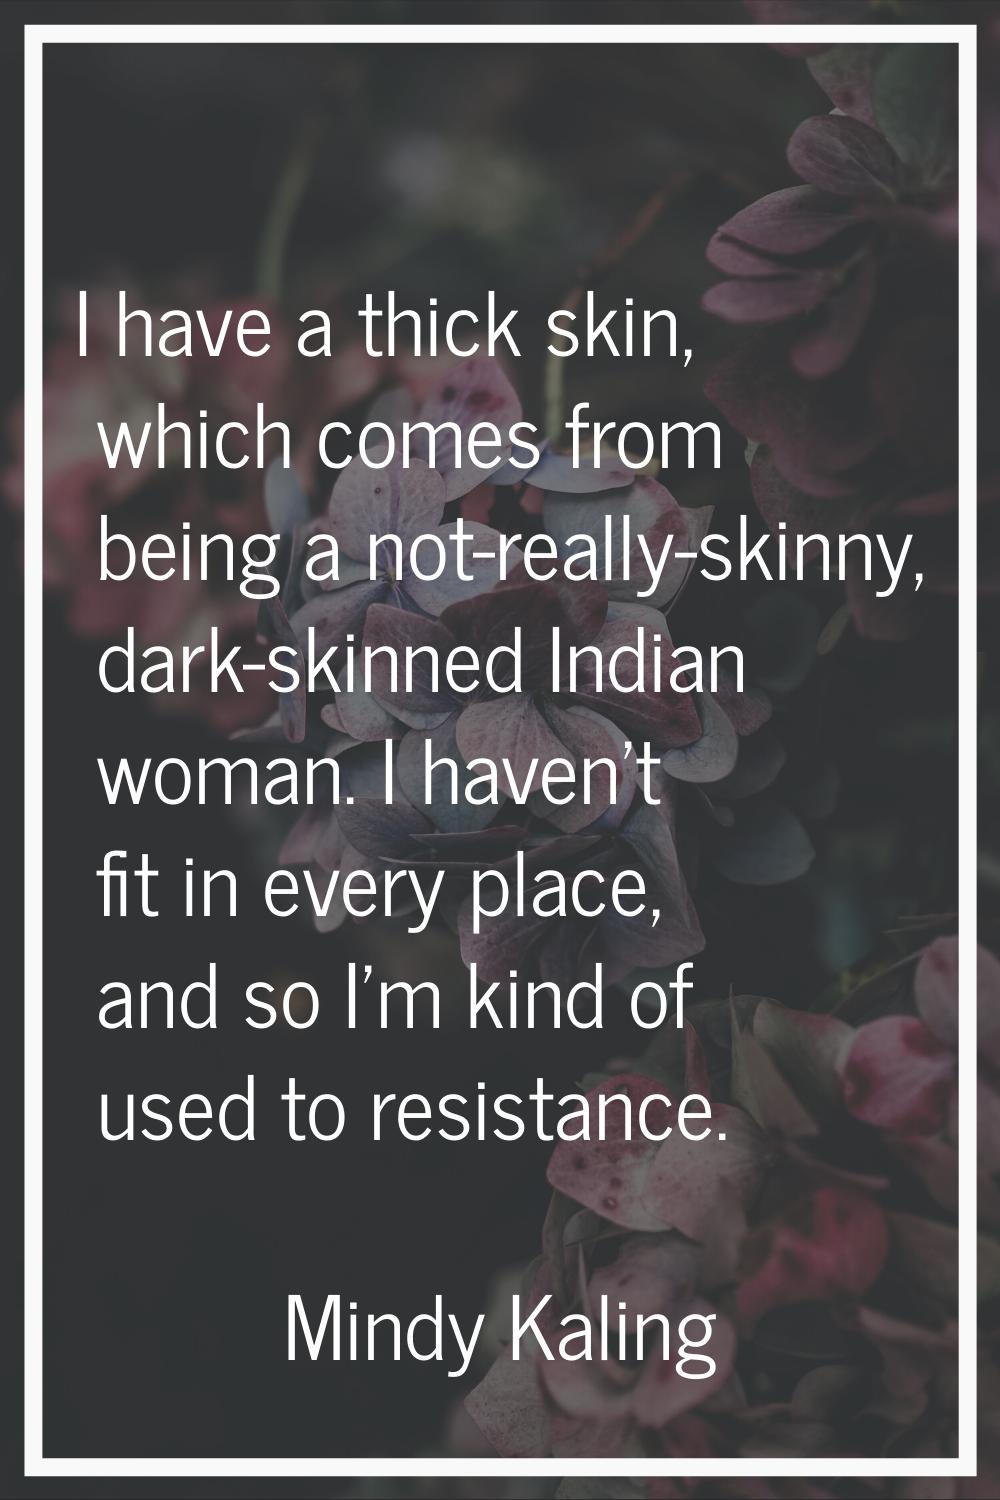 I have a thick skin, which comes from being a not-really-skinny, dark-skinned Indian woman. I haven